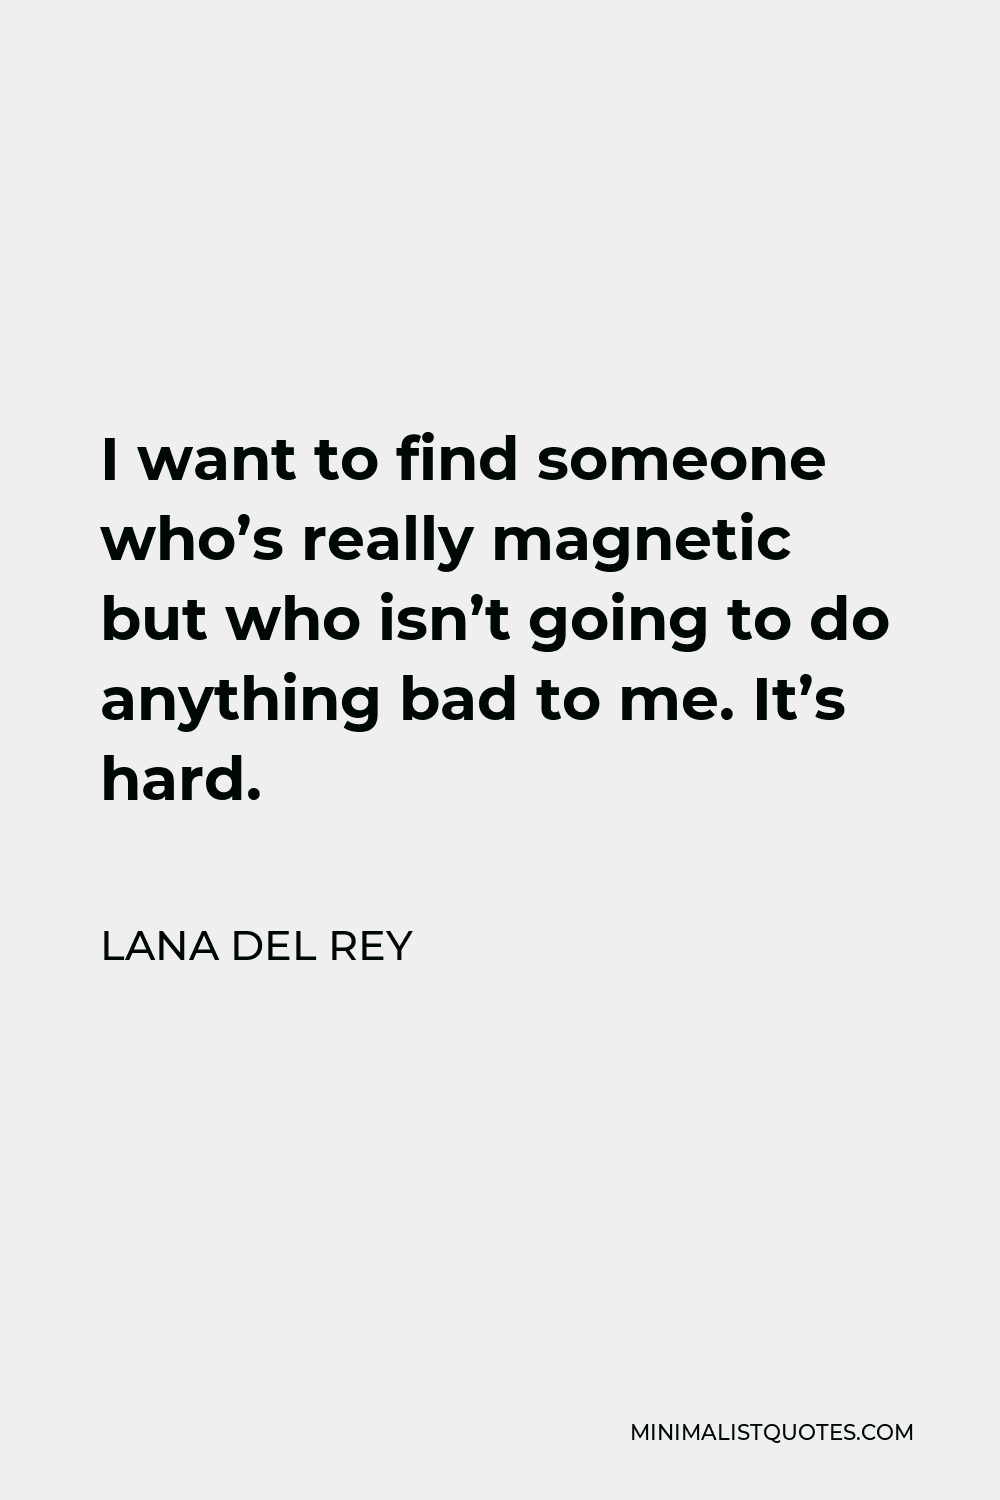 Lana Del Rey Quote - I want to find someone who’s really magnetic but who isn’t going to do anything bad to me. It’s hard.